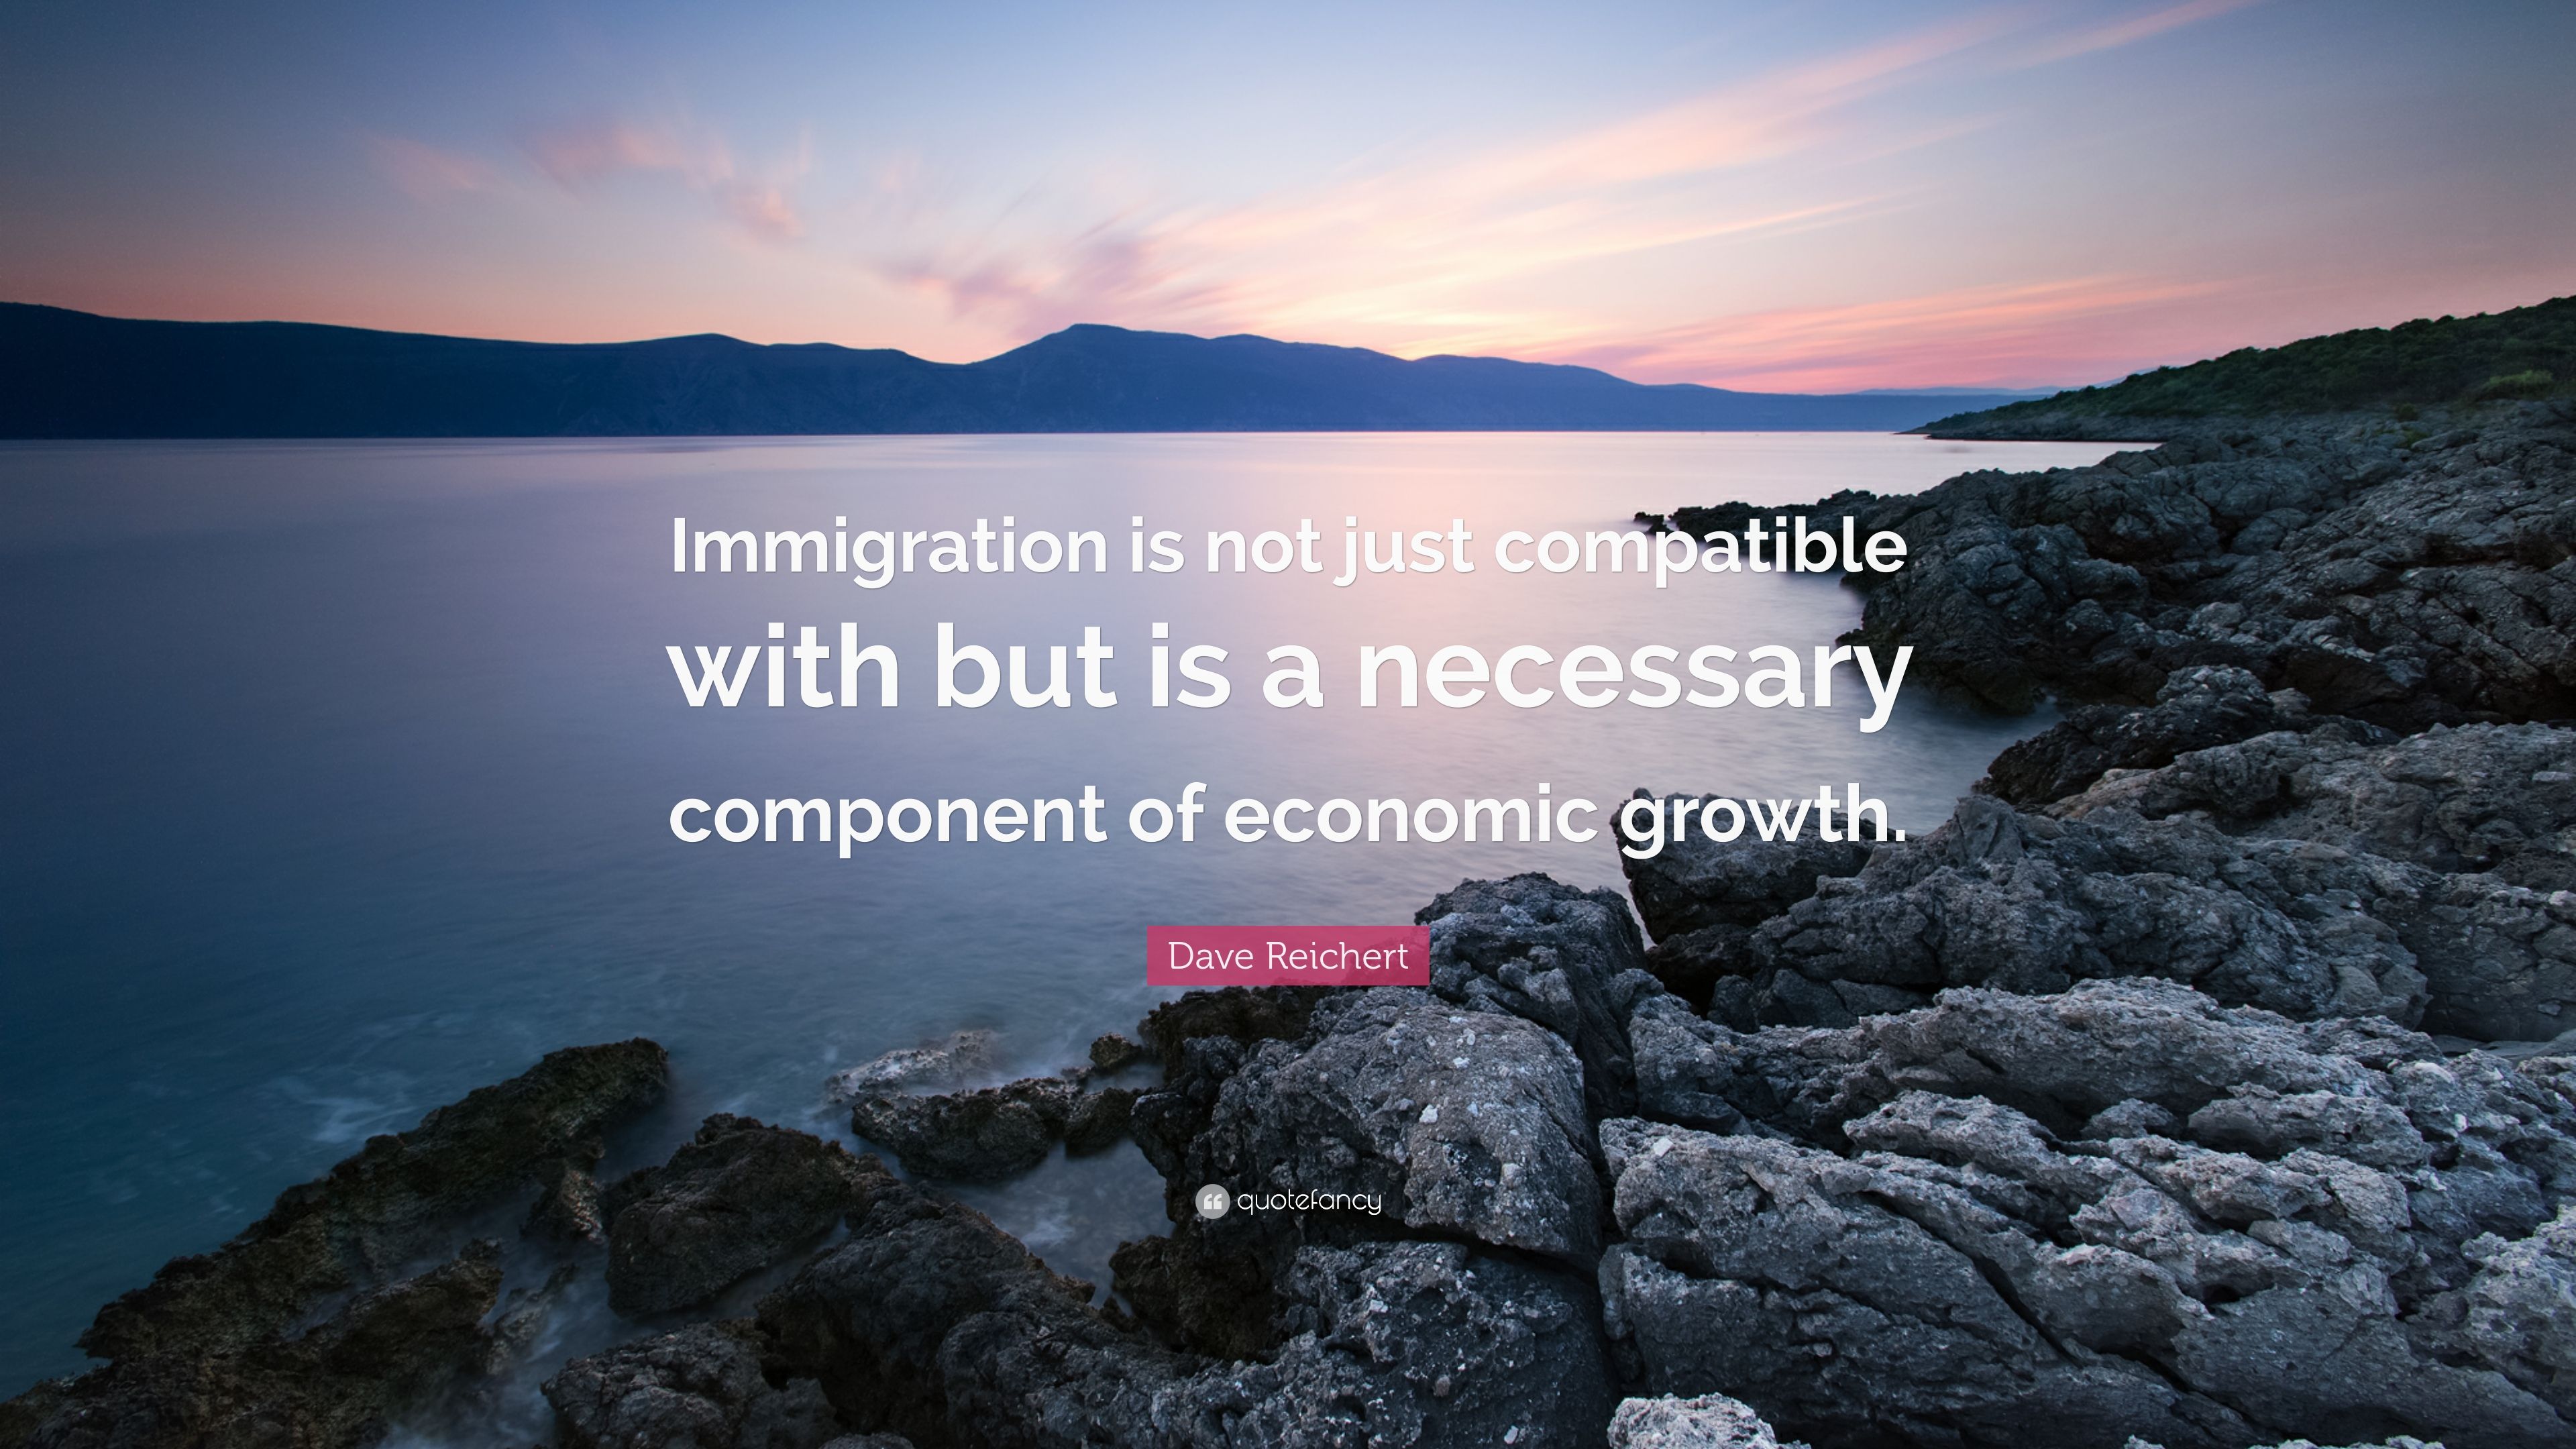 Dave Reichert Quote: “Immigration is not just compatible with but is a necessary component of economic growth.” (7 wallpaper)